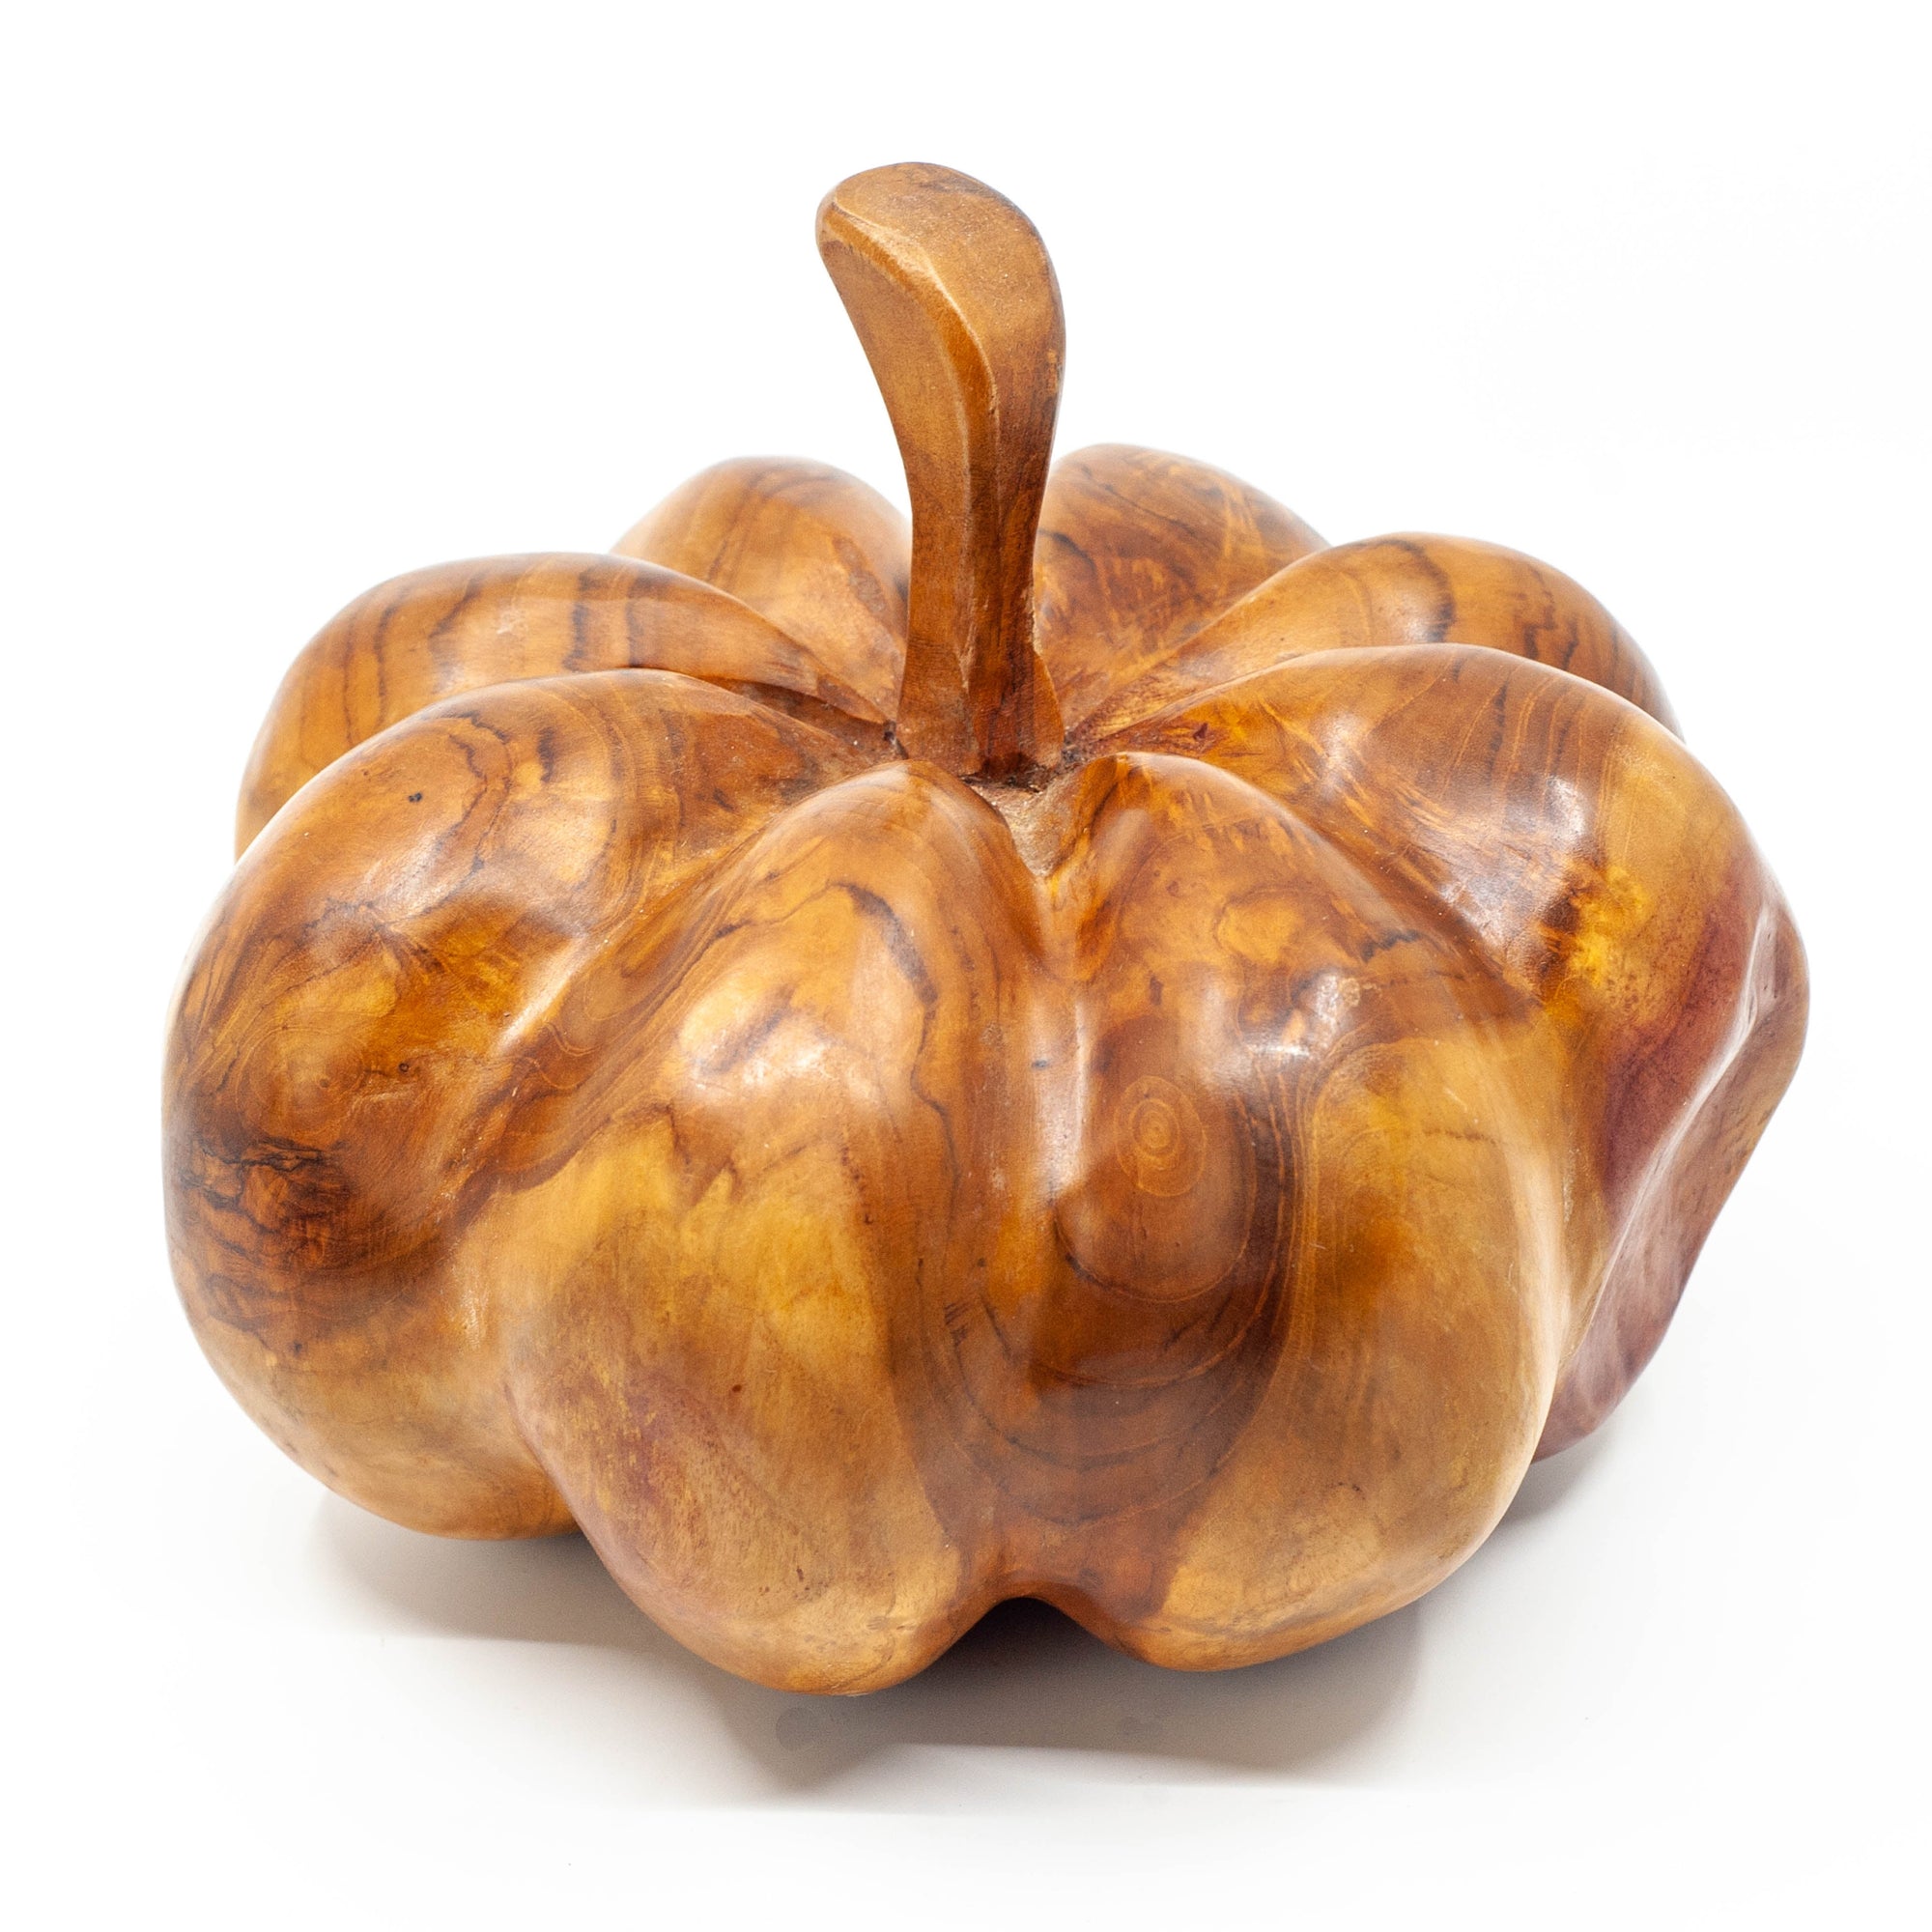 Wooden carved pumpkin on white background